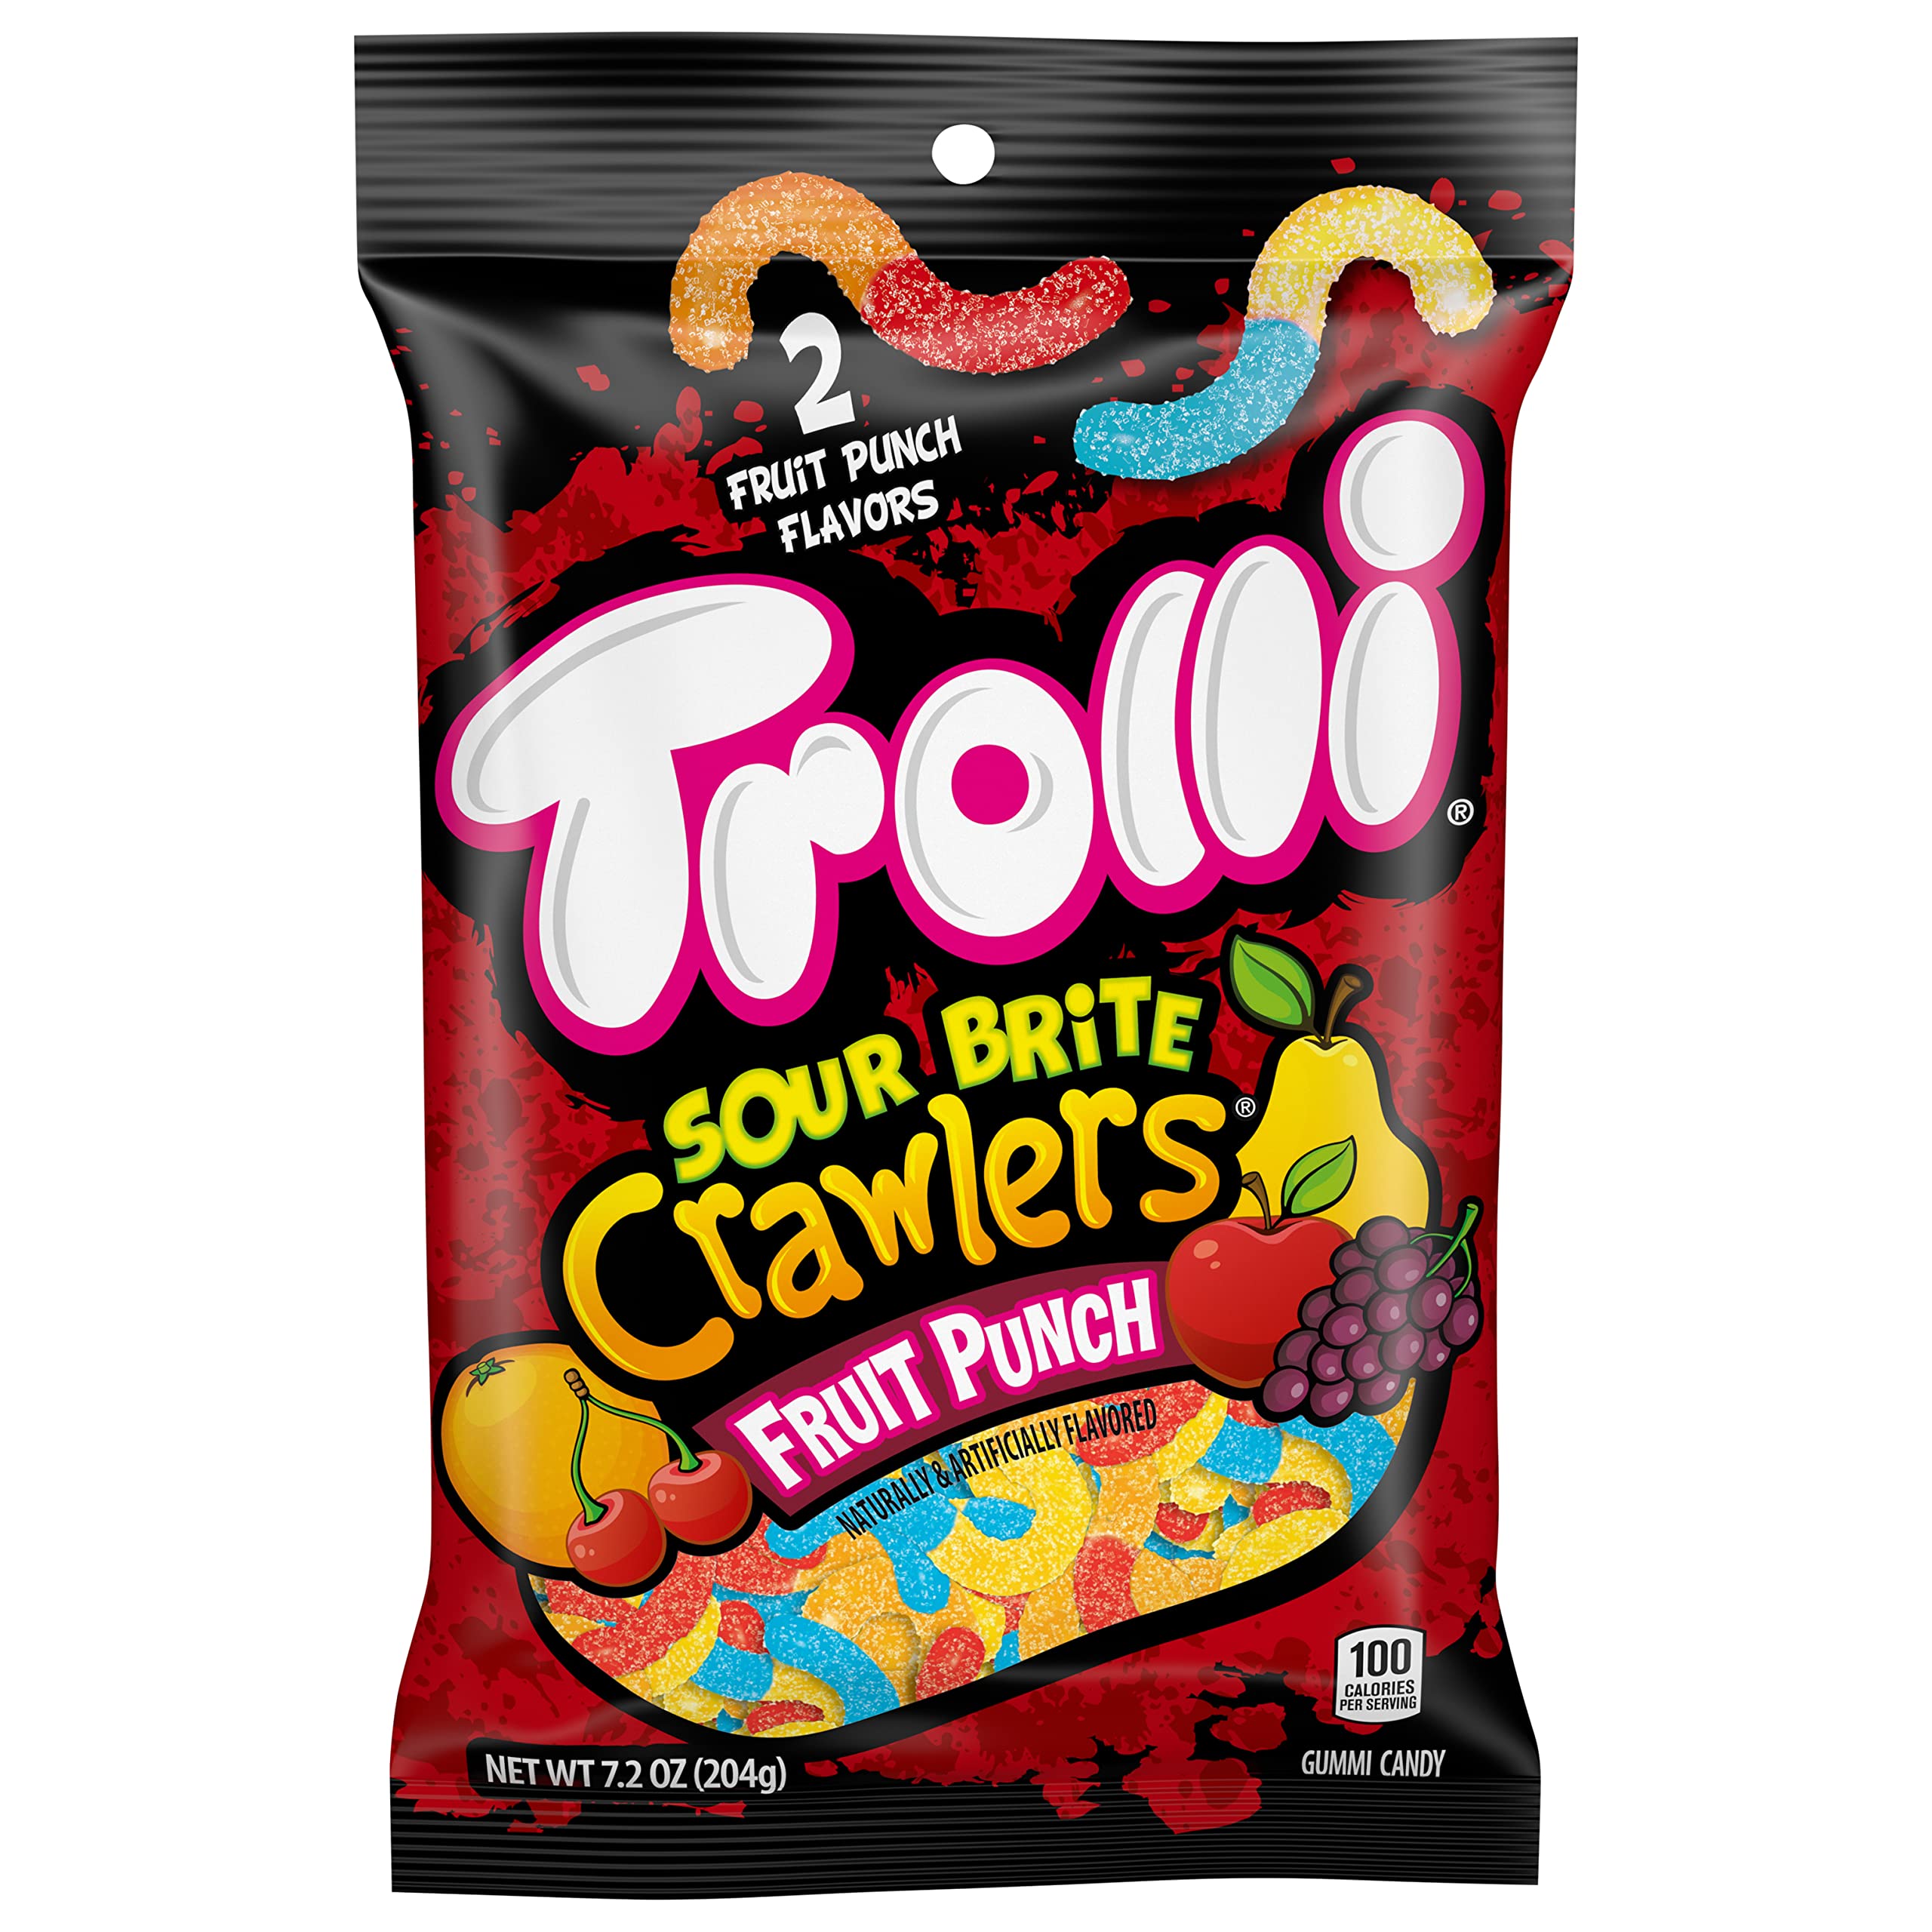 7.2-Oz Trolli Sour Brite Crawlers (Fruit Punch) $0.94 w/ S&S + Free Shipping w/ Prime or on orders over $35